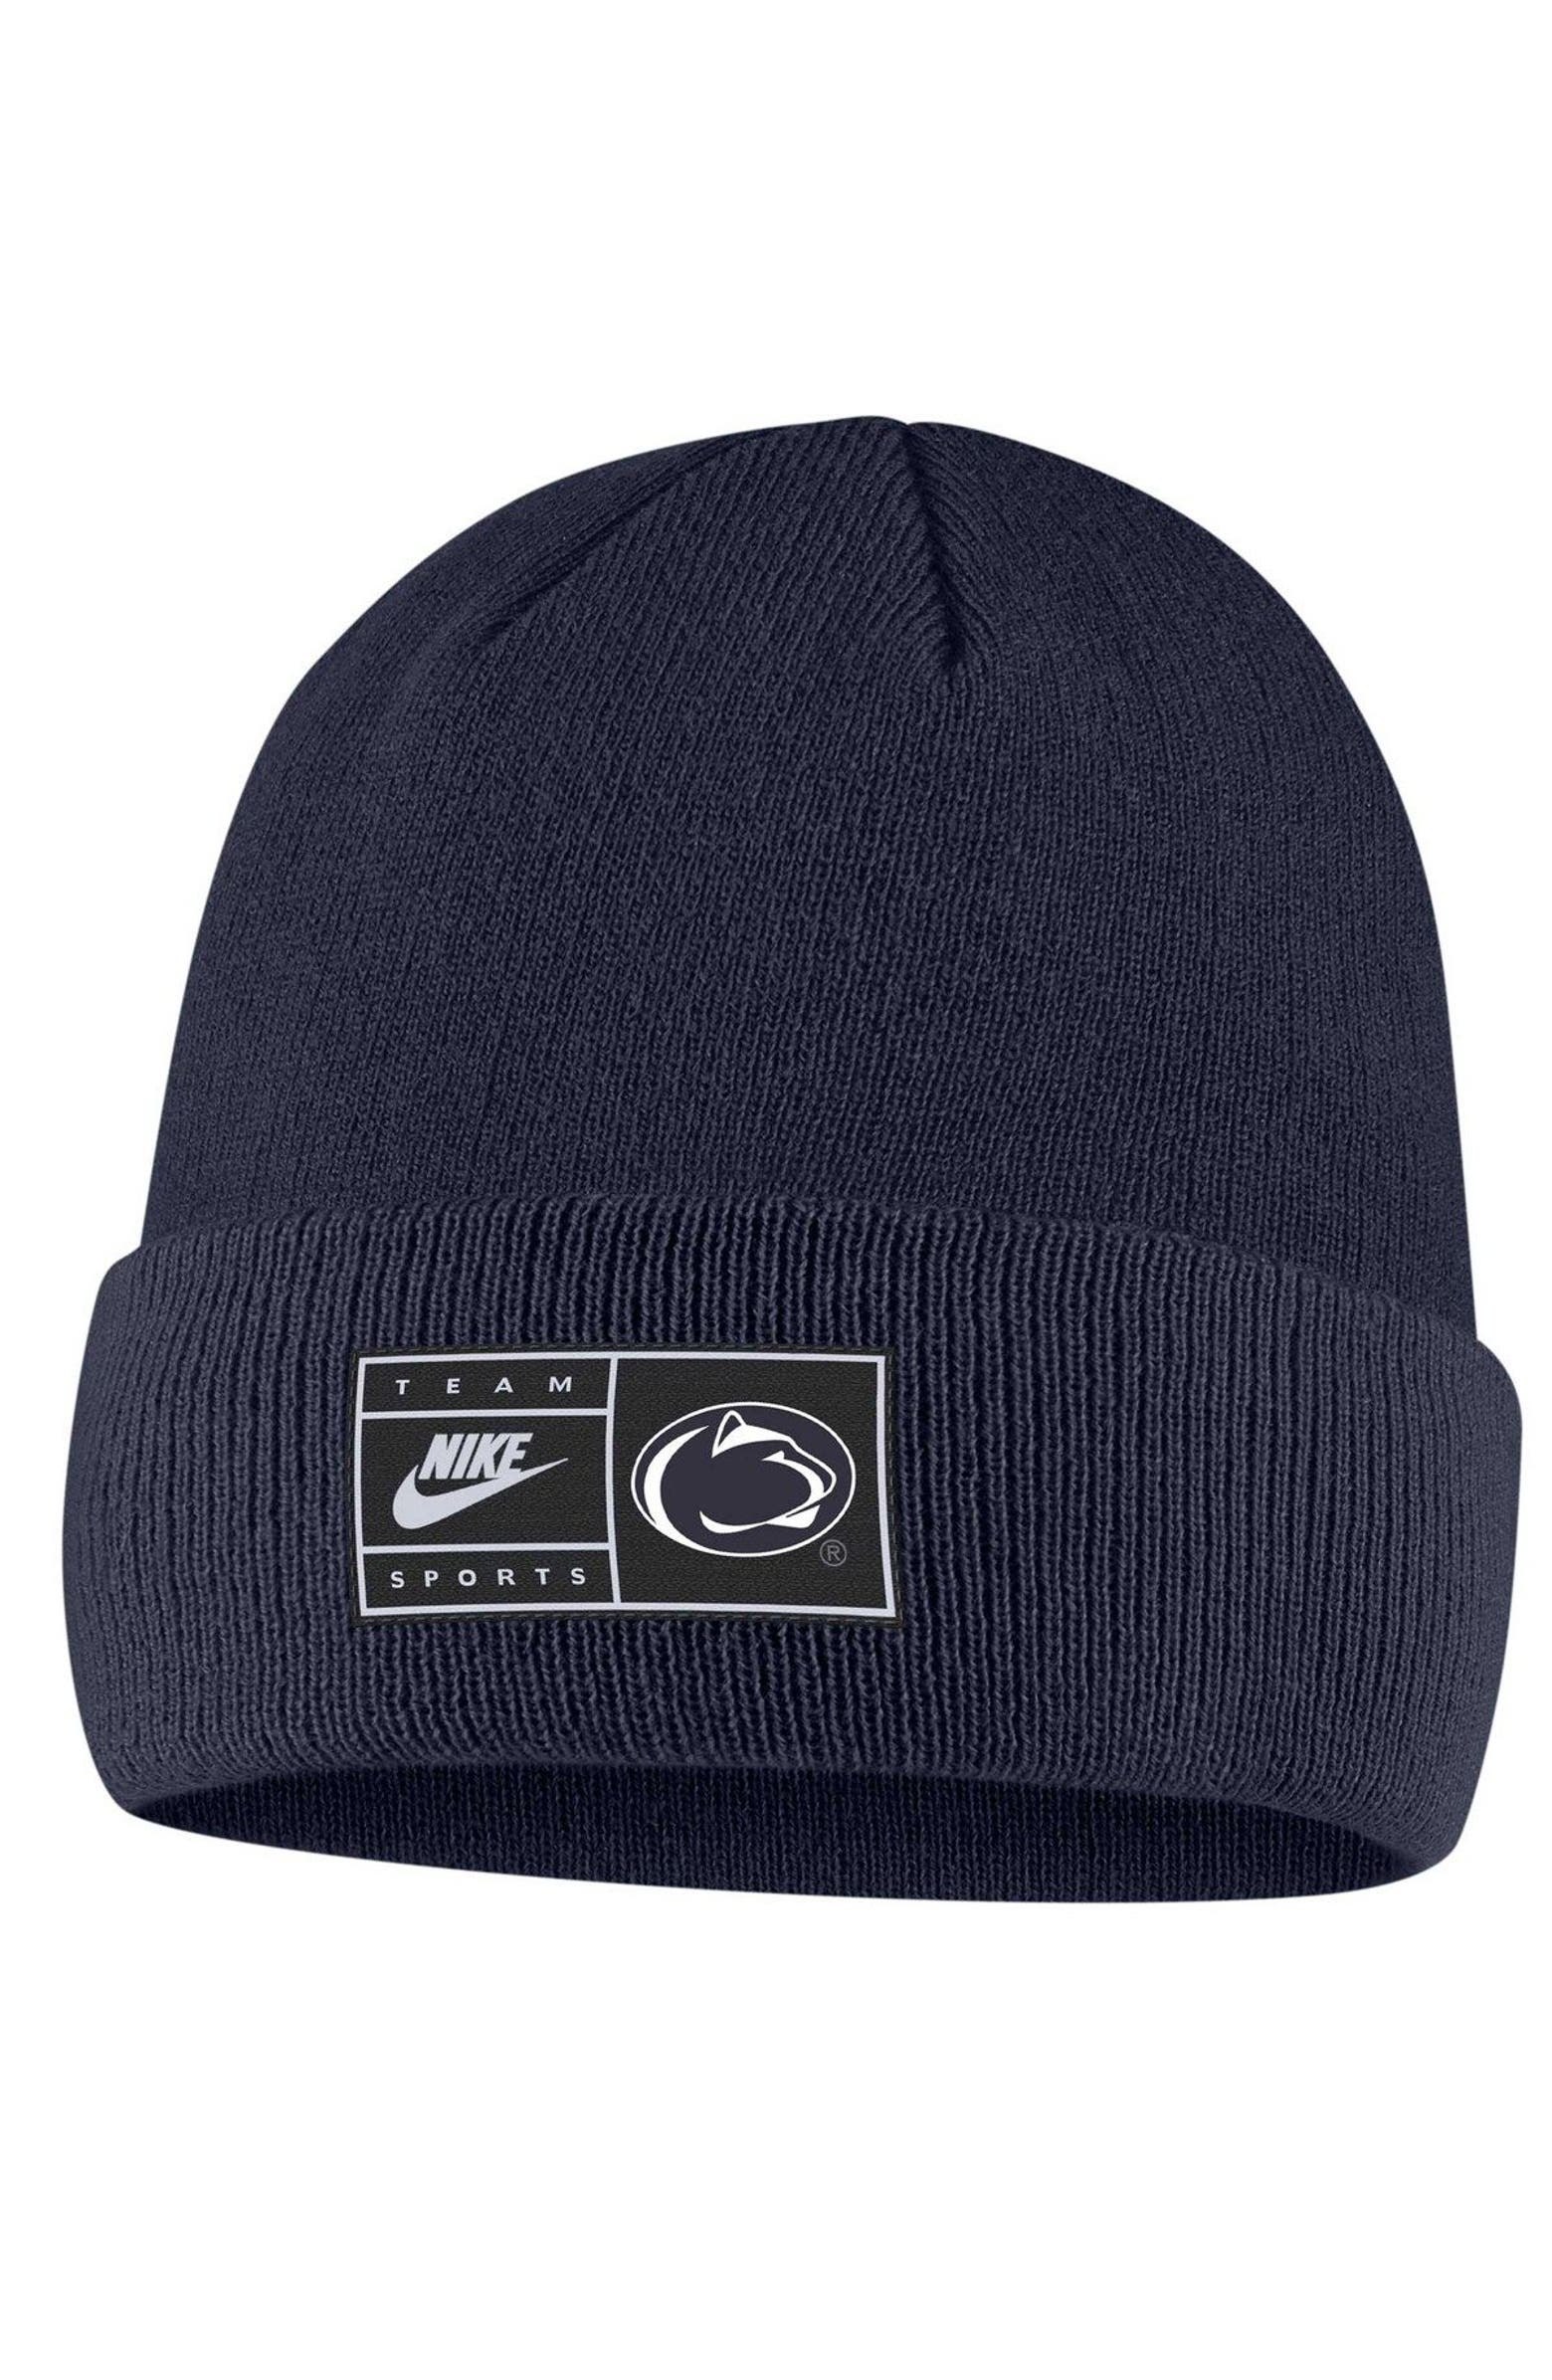 Nike Men's Nike Navy Penn State Nittany Lions Utility Cuffed Knit Hat ...